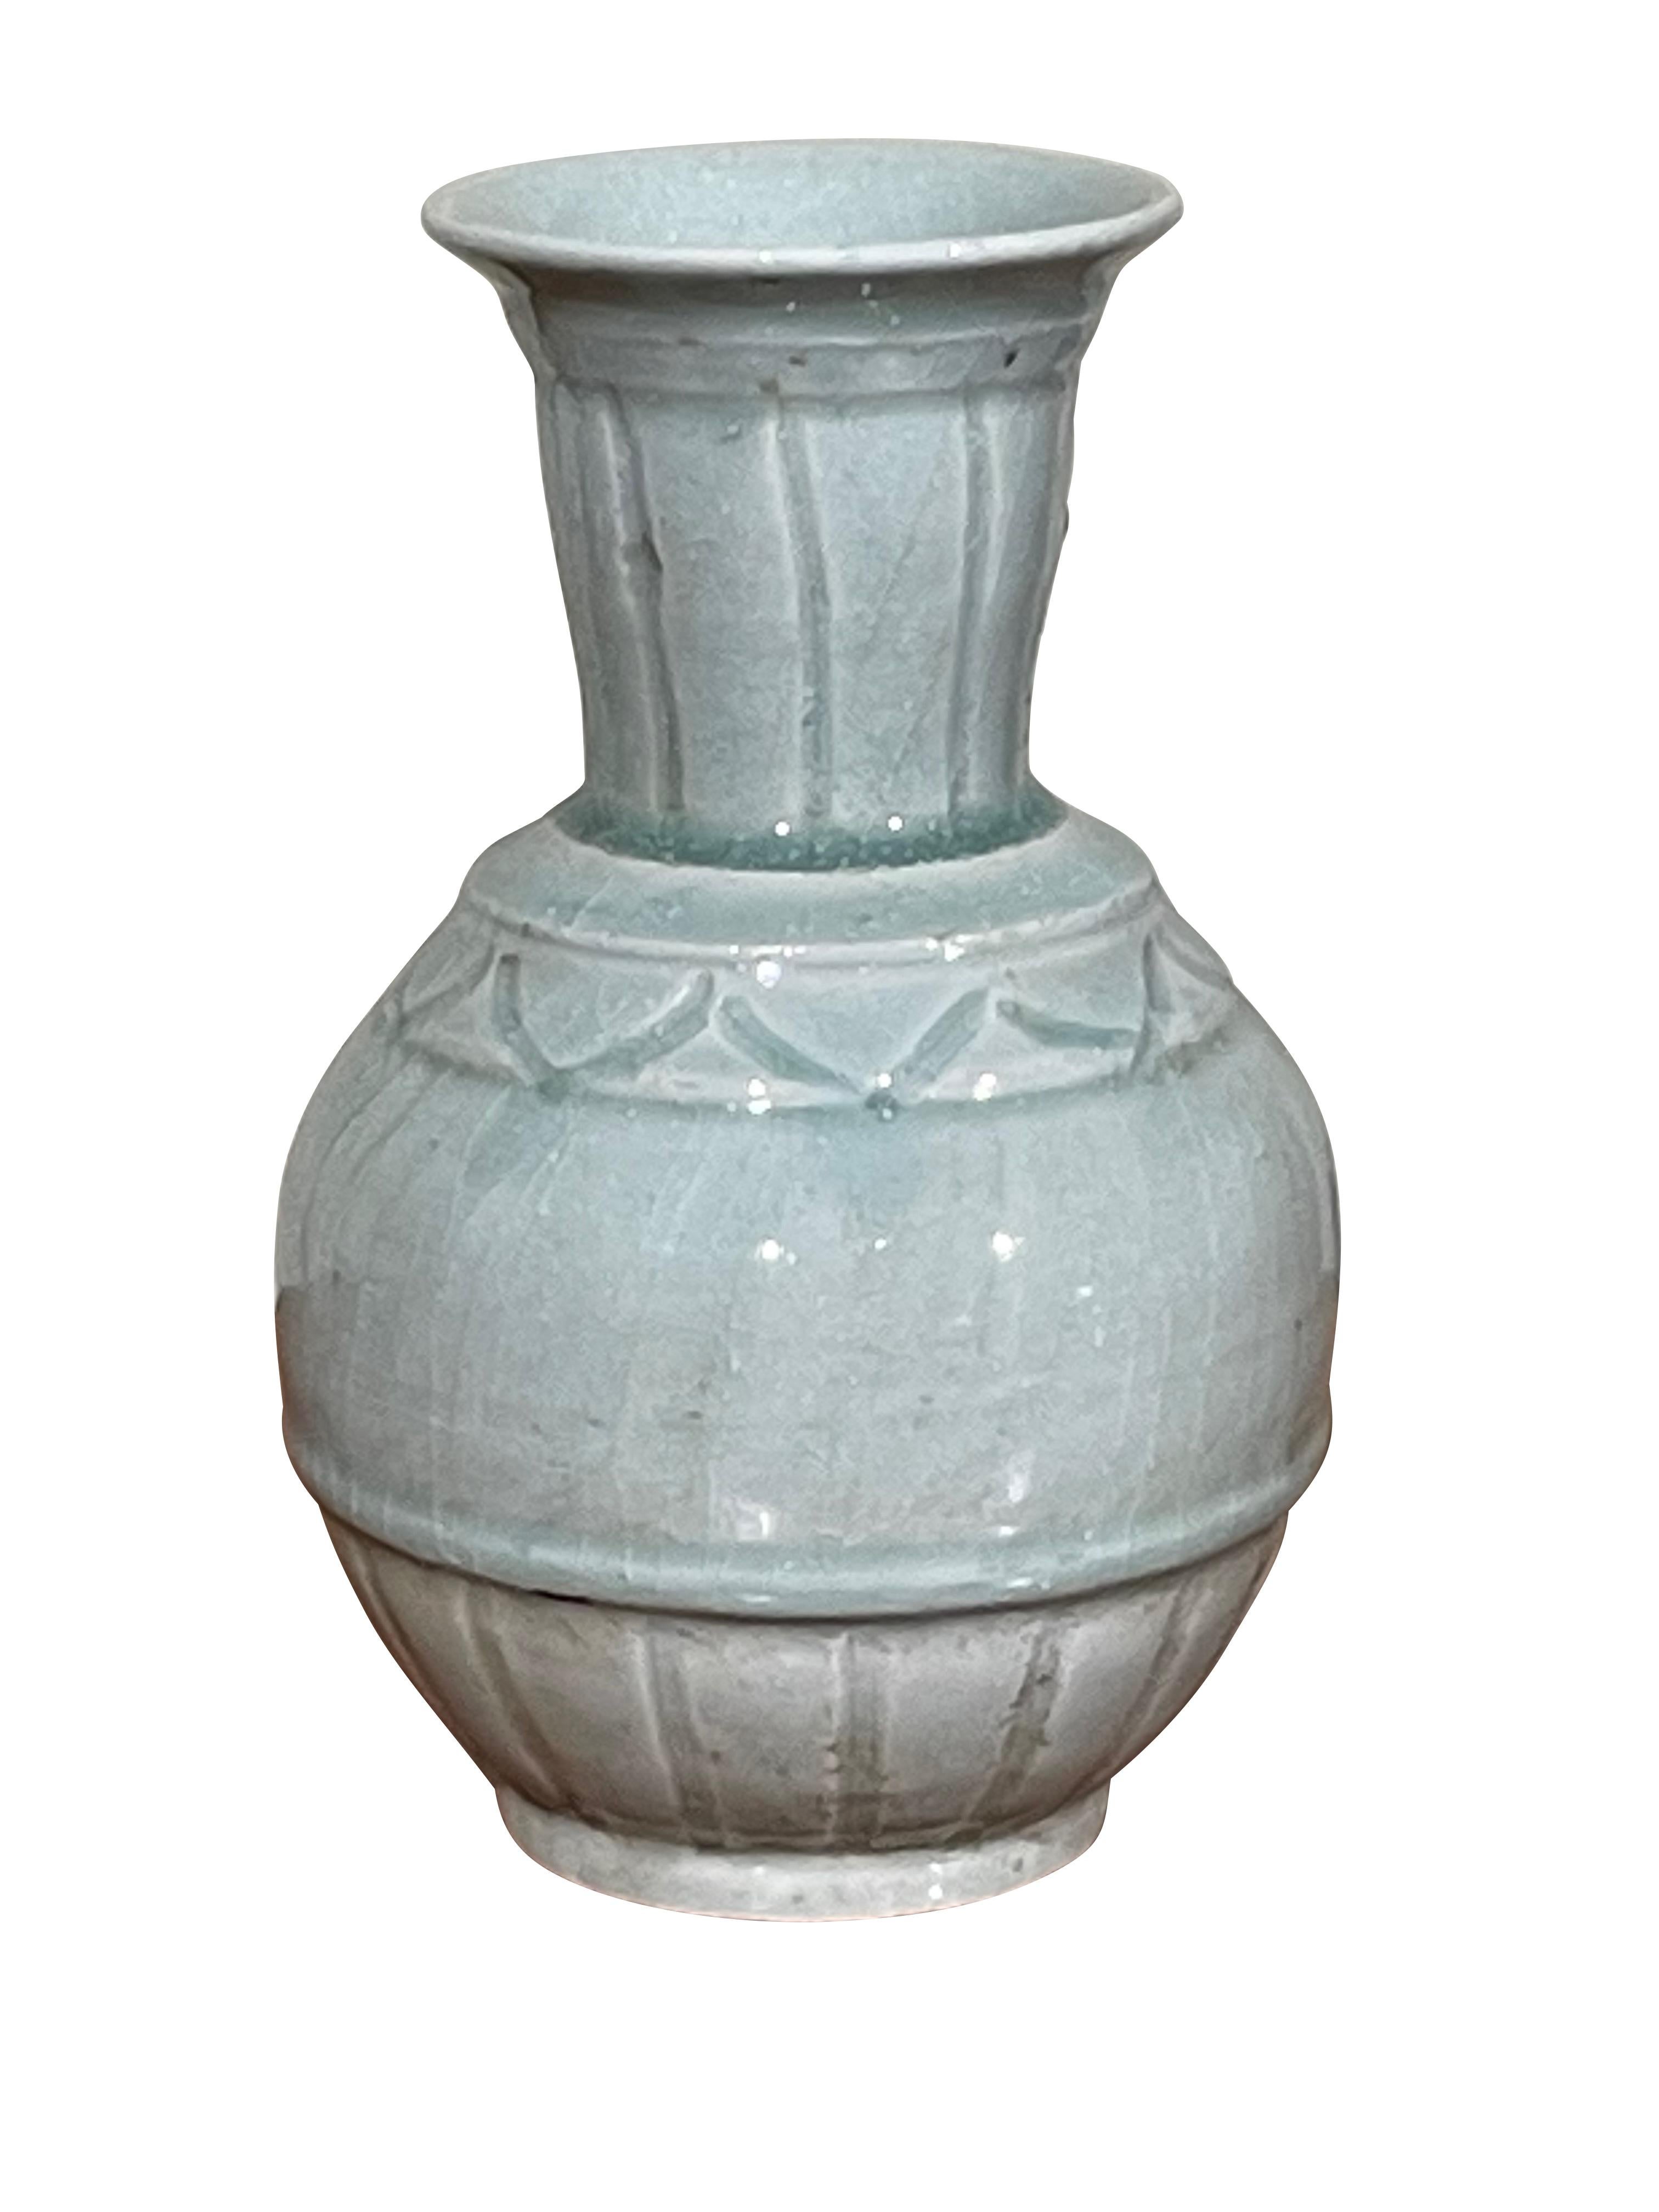 Contemporary Chinese pale turquoise vase.
Decorative design.
From a collection of three pieces sold individually.
